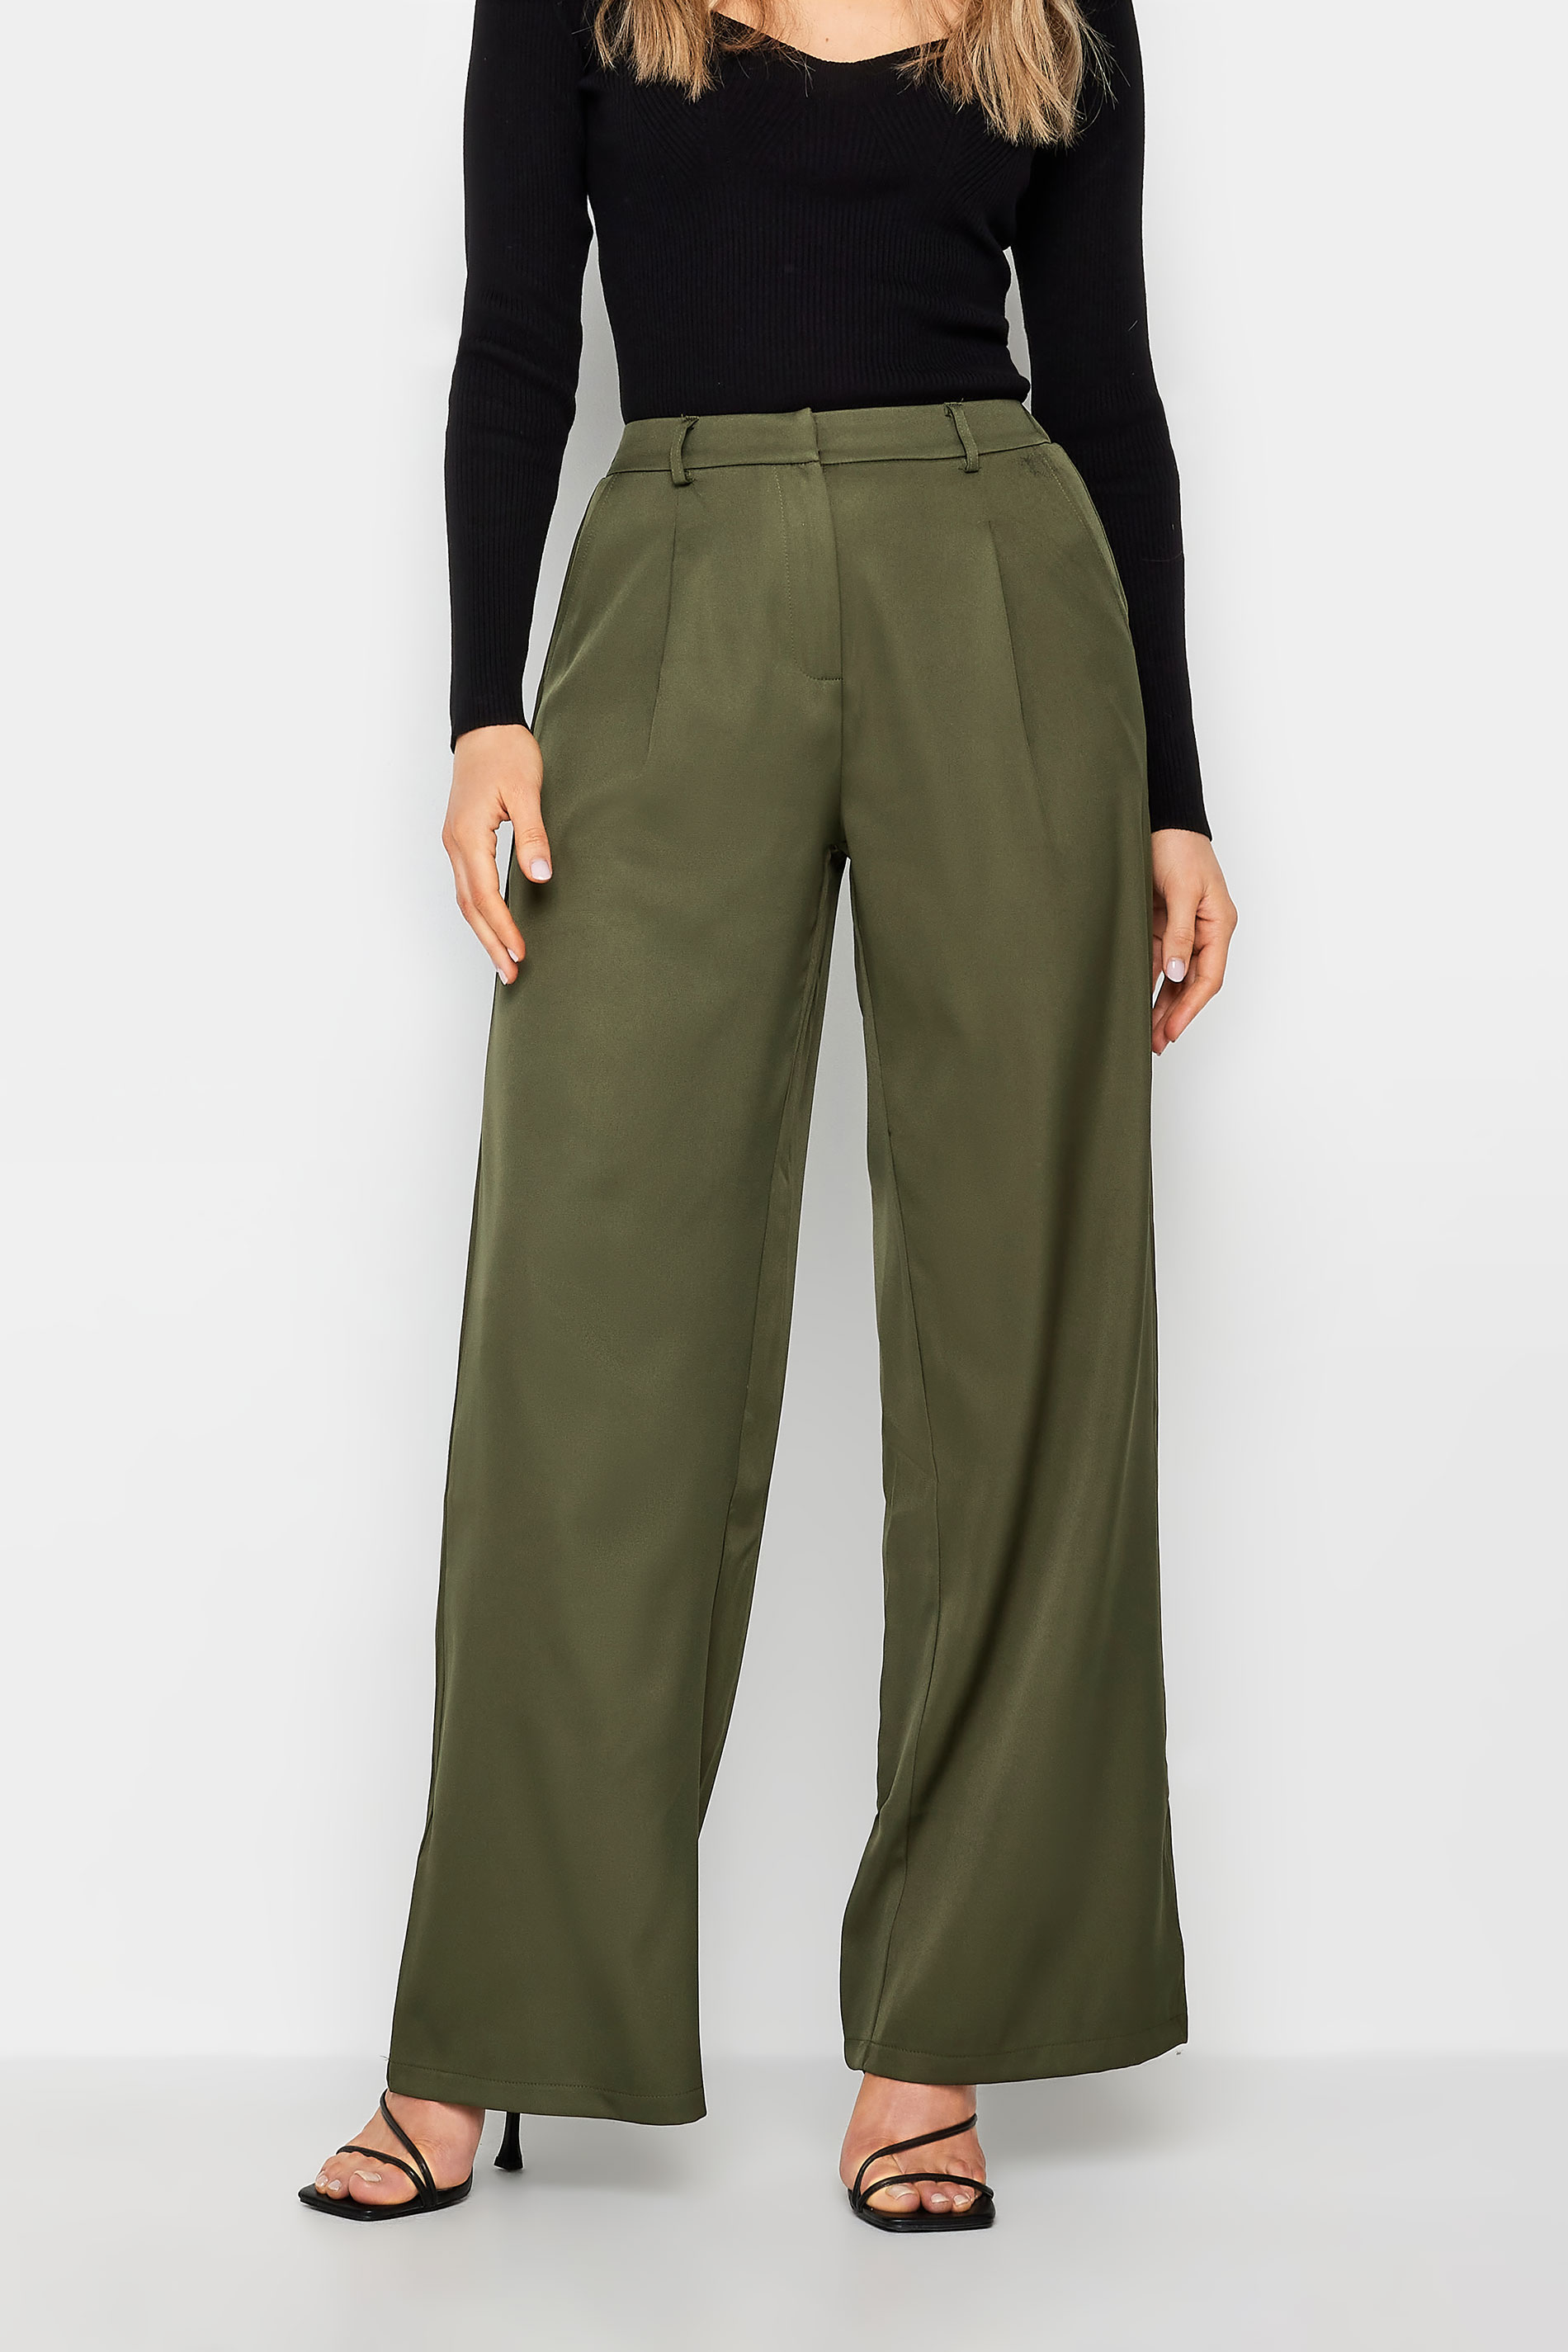 LTS Tall Womens Olive Green Tailored Wide Leg Trousers | Long Tall Sally 3